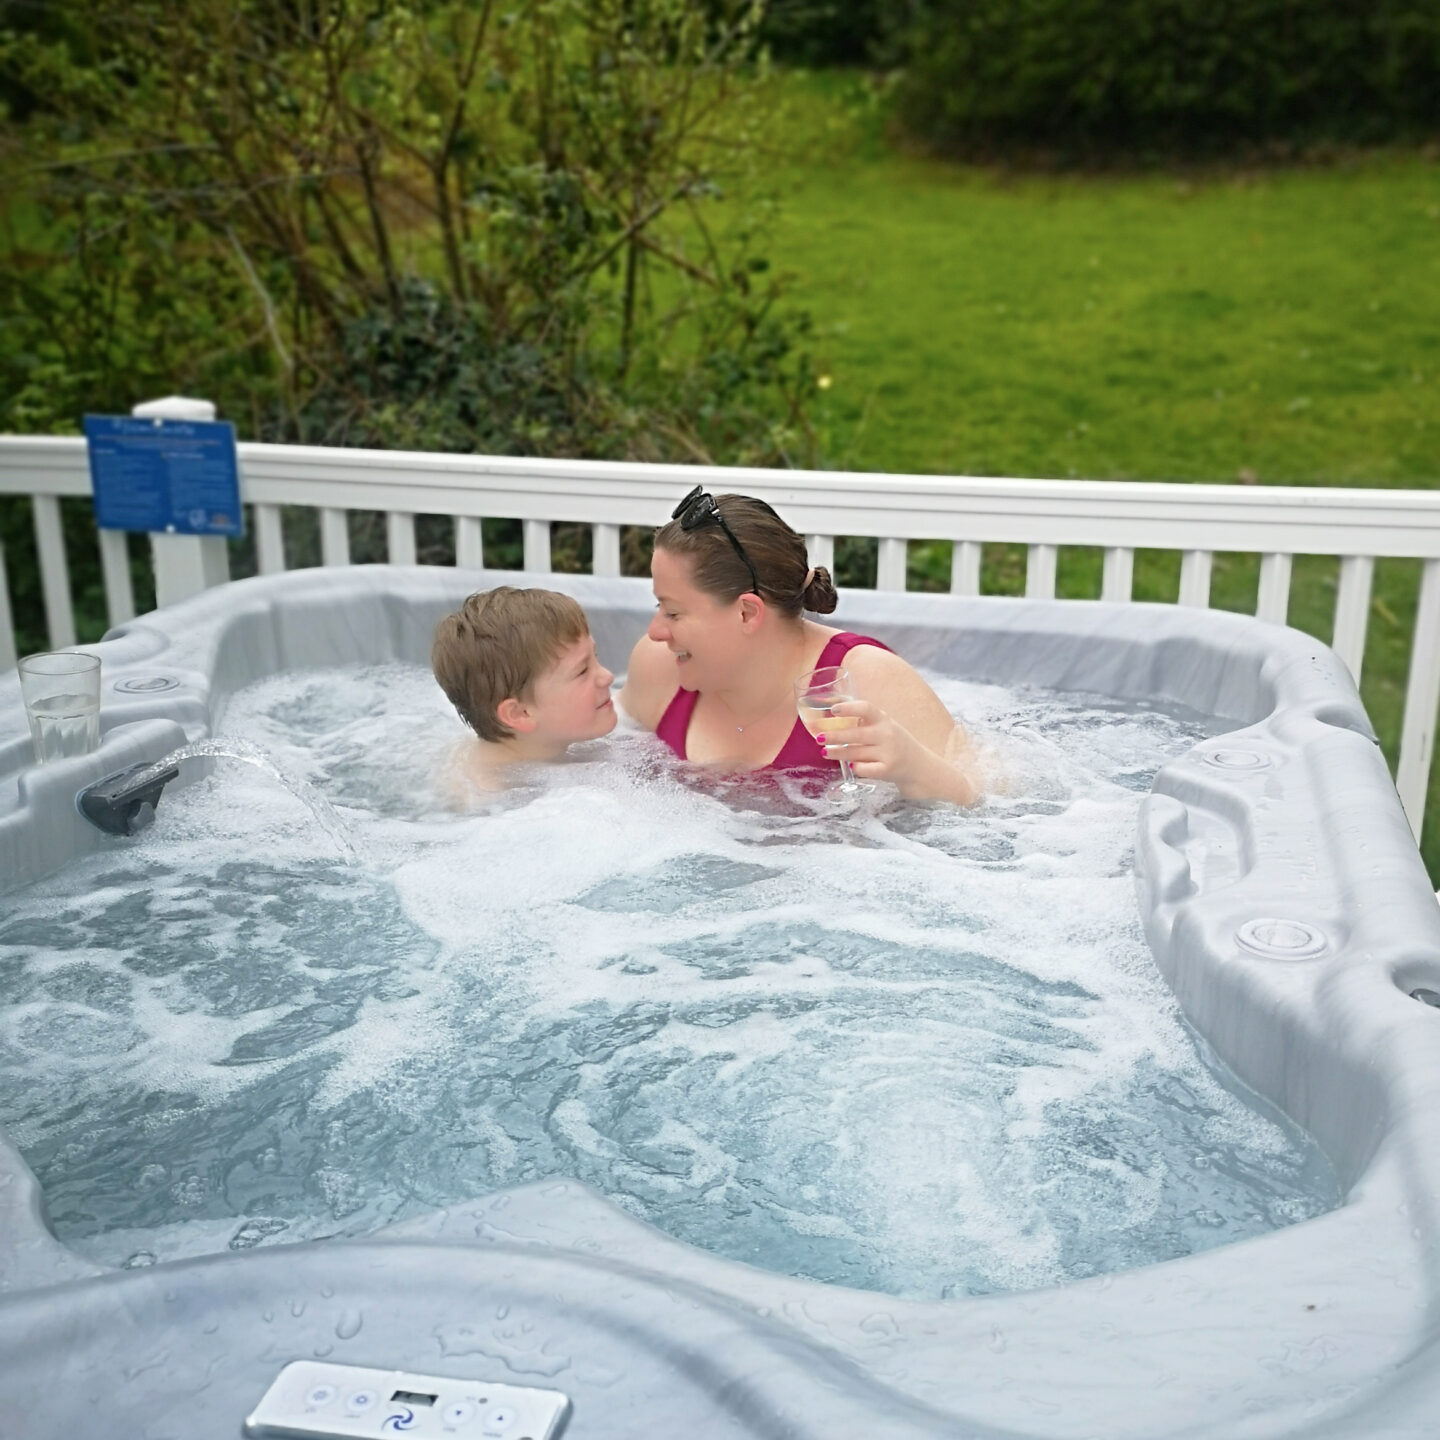  Shorefield Country Park, Shorefield Holidays, Self-catering Lodges, Holidays Park, Signature Lodge, Hot Tube, Dorset, Hampshire, Holiday Accommodation, Easter Break, Family-Friendly, Travel Reviews, Family Review, the Frenchie Mummy , Family holidays